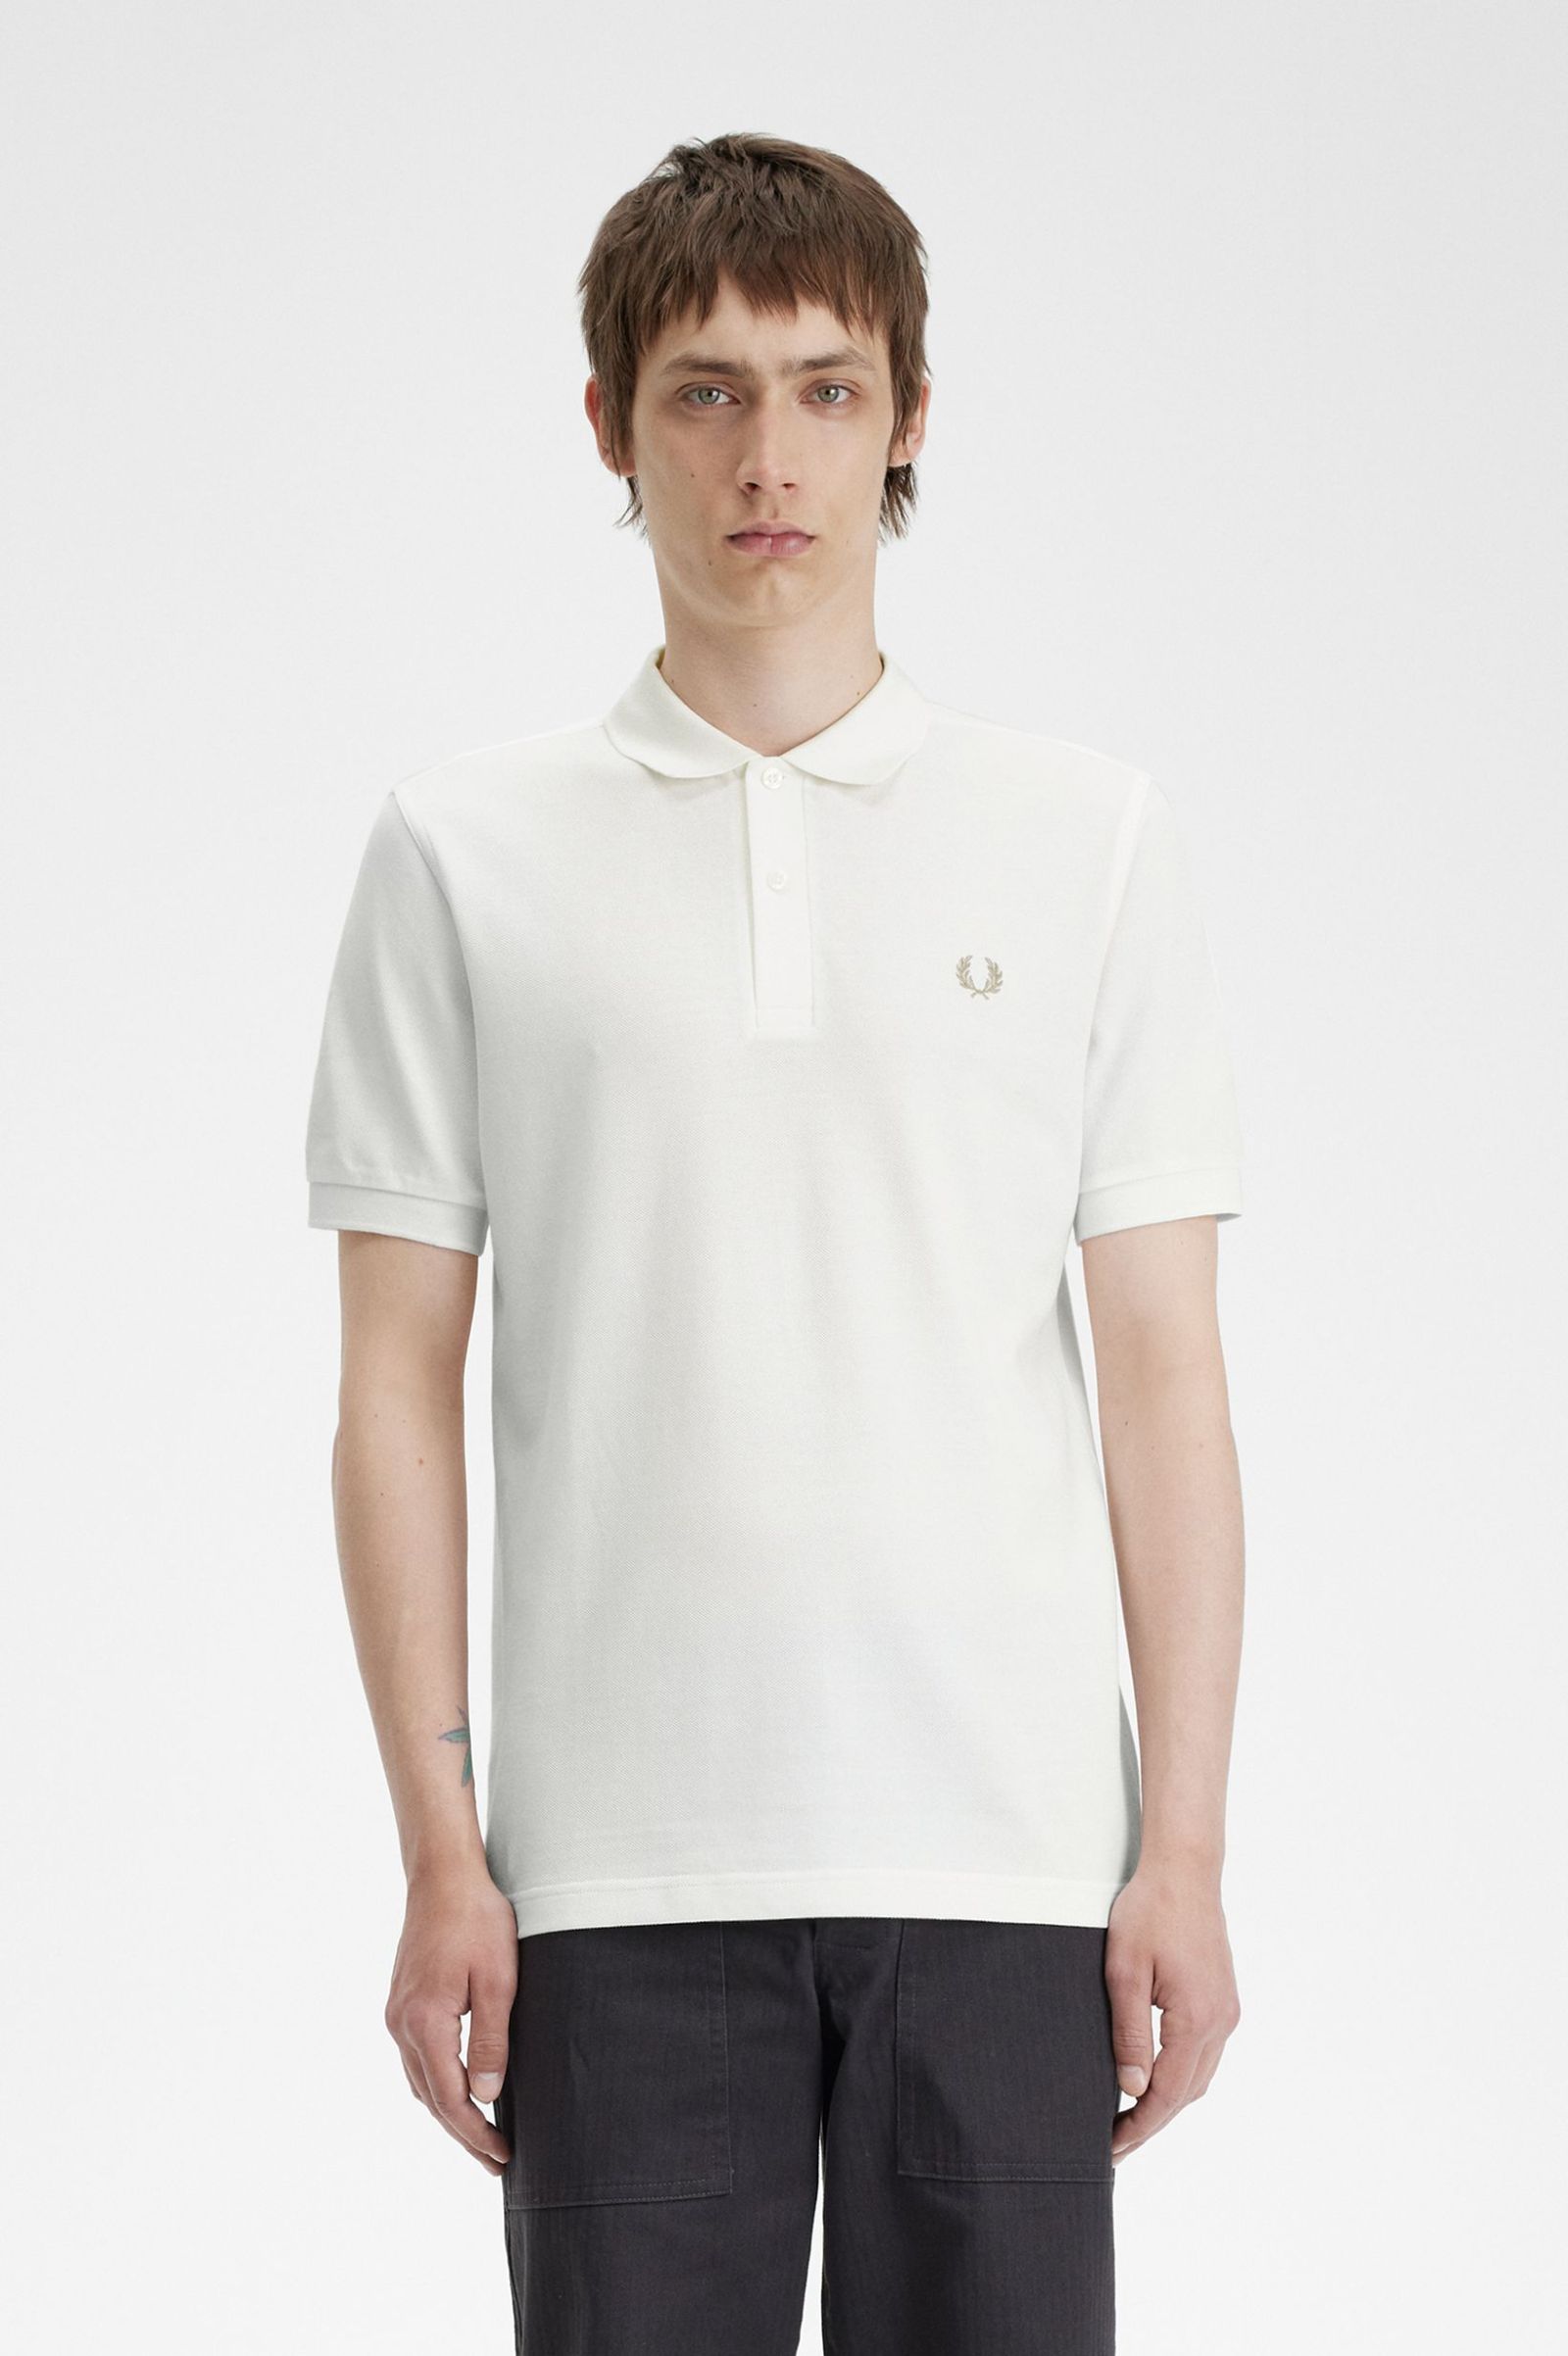 M6000 - Snow White / Warm Stone | The Fred Perry Shirt | Men's Short ...